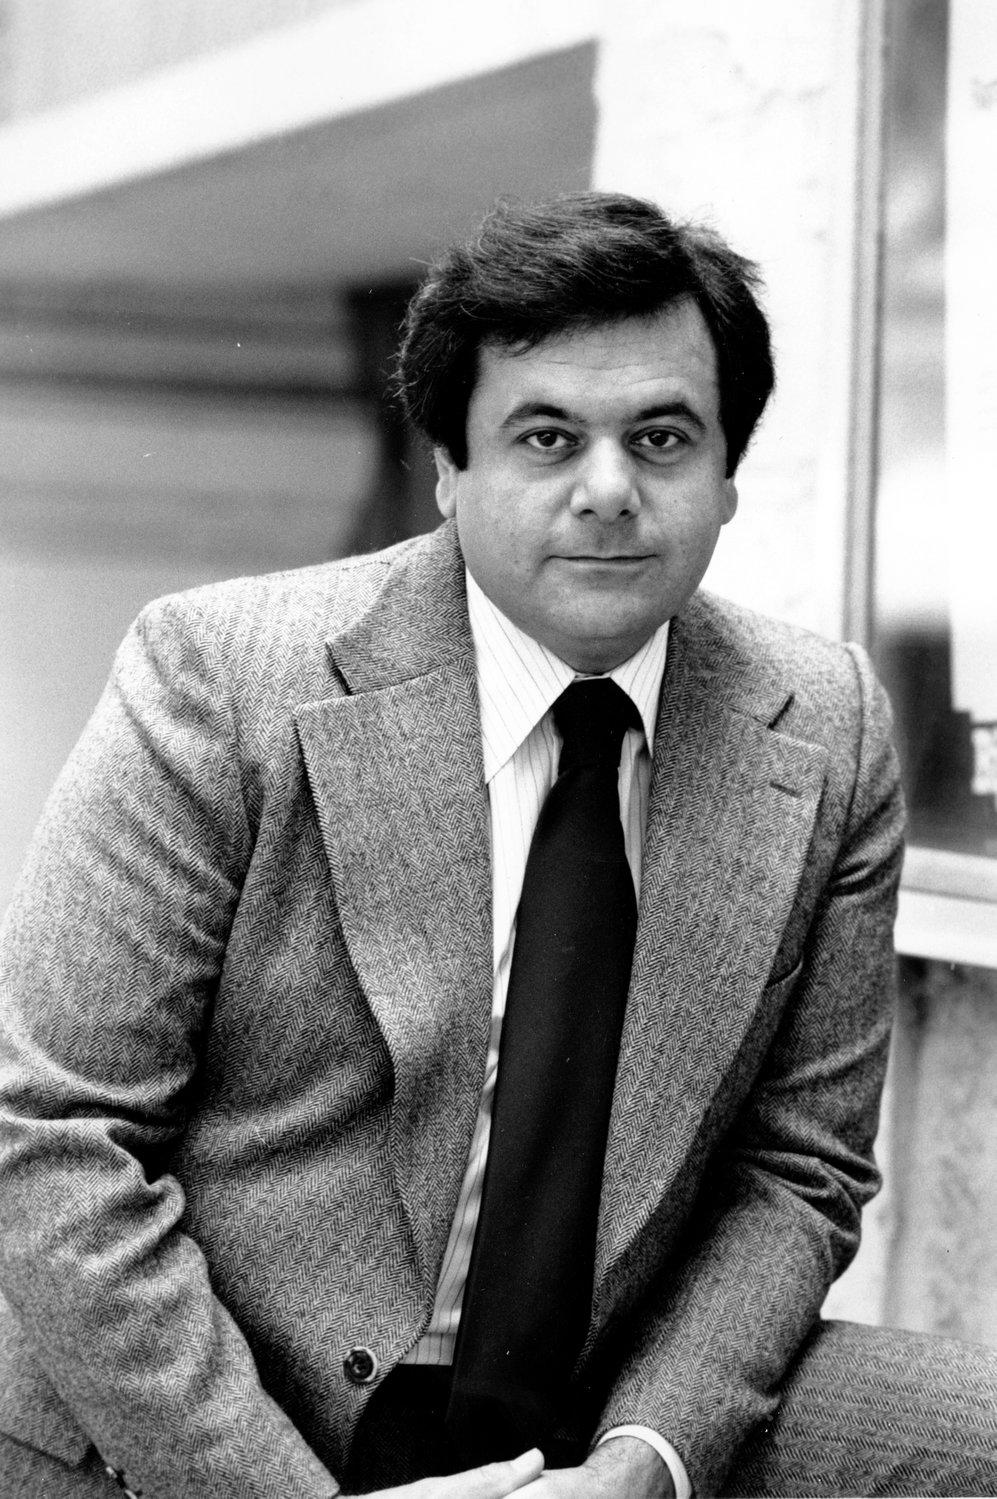 FILE - Actor Paul Sorvino poses at the Bijou Theater where he is directing "Wheelbarrow Closers" in New York City on Oct. 6, 1976. Sorvino, an imposing actor who specialized in playing crooks and cops like Paulie Cicero in ‚ÄúGoodfellas‚Äù and the NYPD sergeant Phil Cerretta on ‚ÄúLaw &amp; Order,‚Äù has died. He was 83. (AP Photo, File)